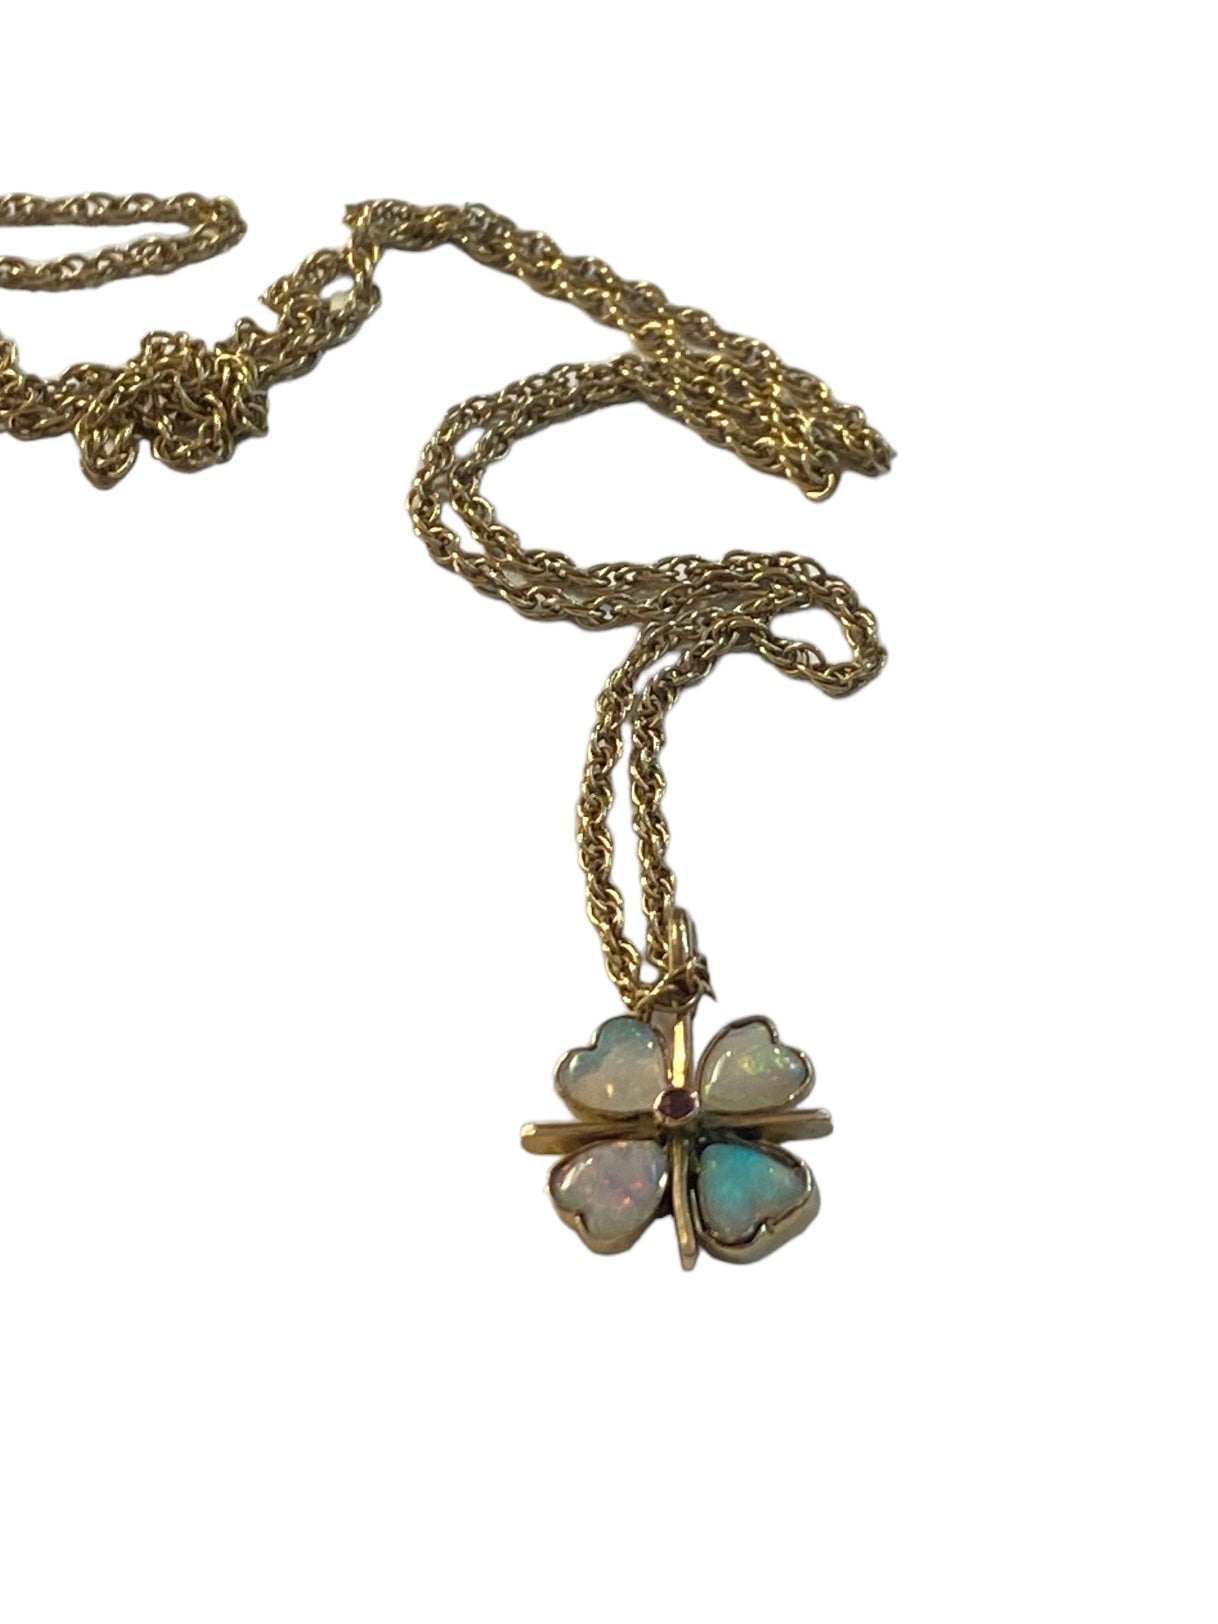 9ct vintage four leaf clover pendant with opals and 20 inch chain